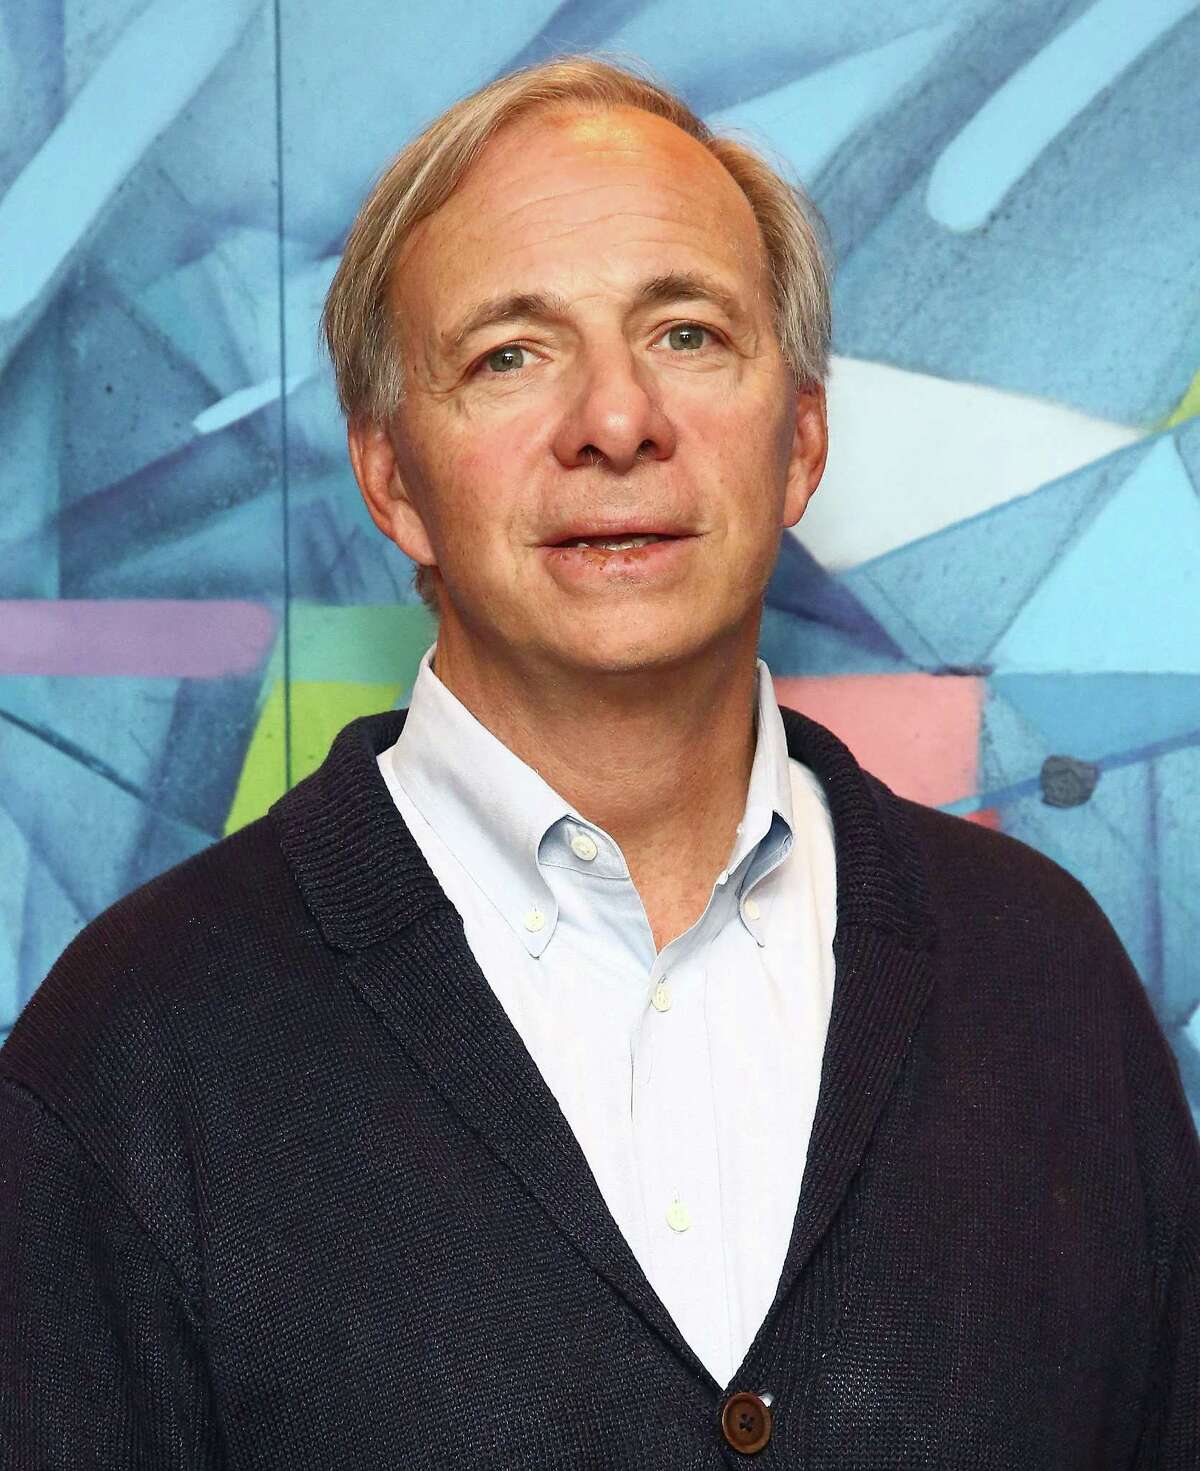 Ray Dalio - Greenwich Rank: 26 out of 400 | Net worth: $17B | Industry: Hedge fundsSource: Forbes